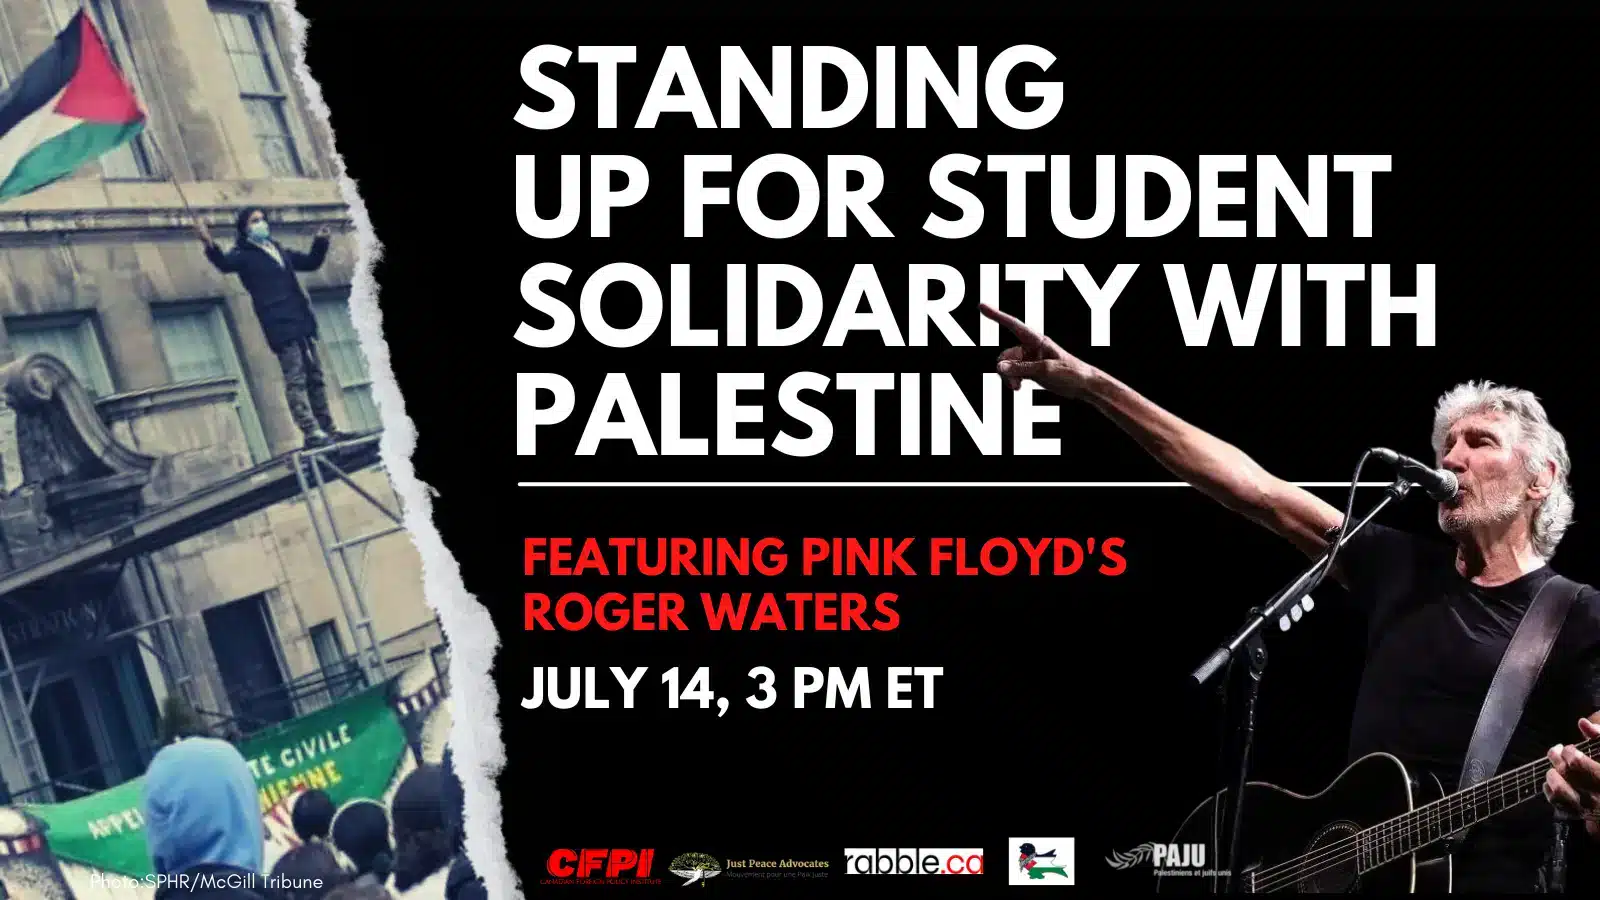 Photo composition portraying a student on a protest holding the Palestinian flag (left), Roger Water (right) and the caption “Standing up for student solidarity with Palestine. Photo: YvesEngler.com.